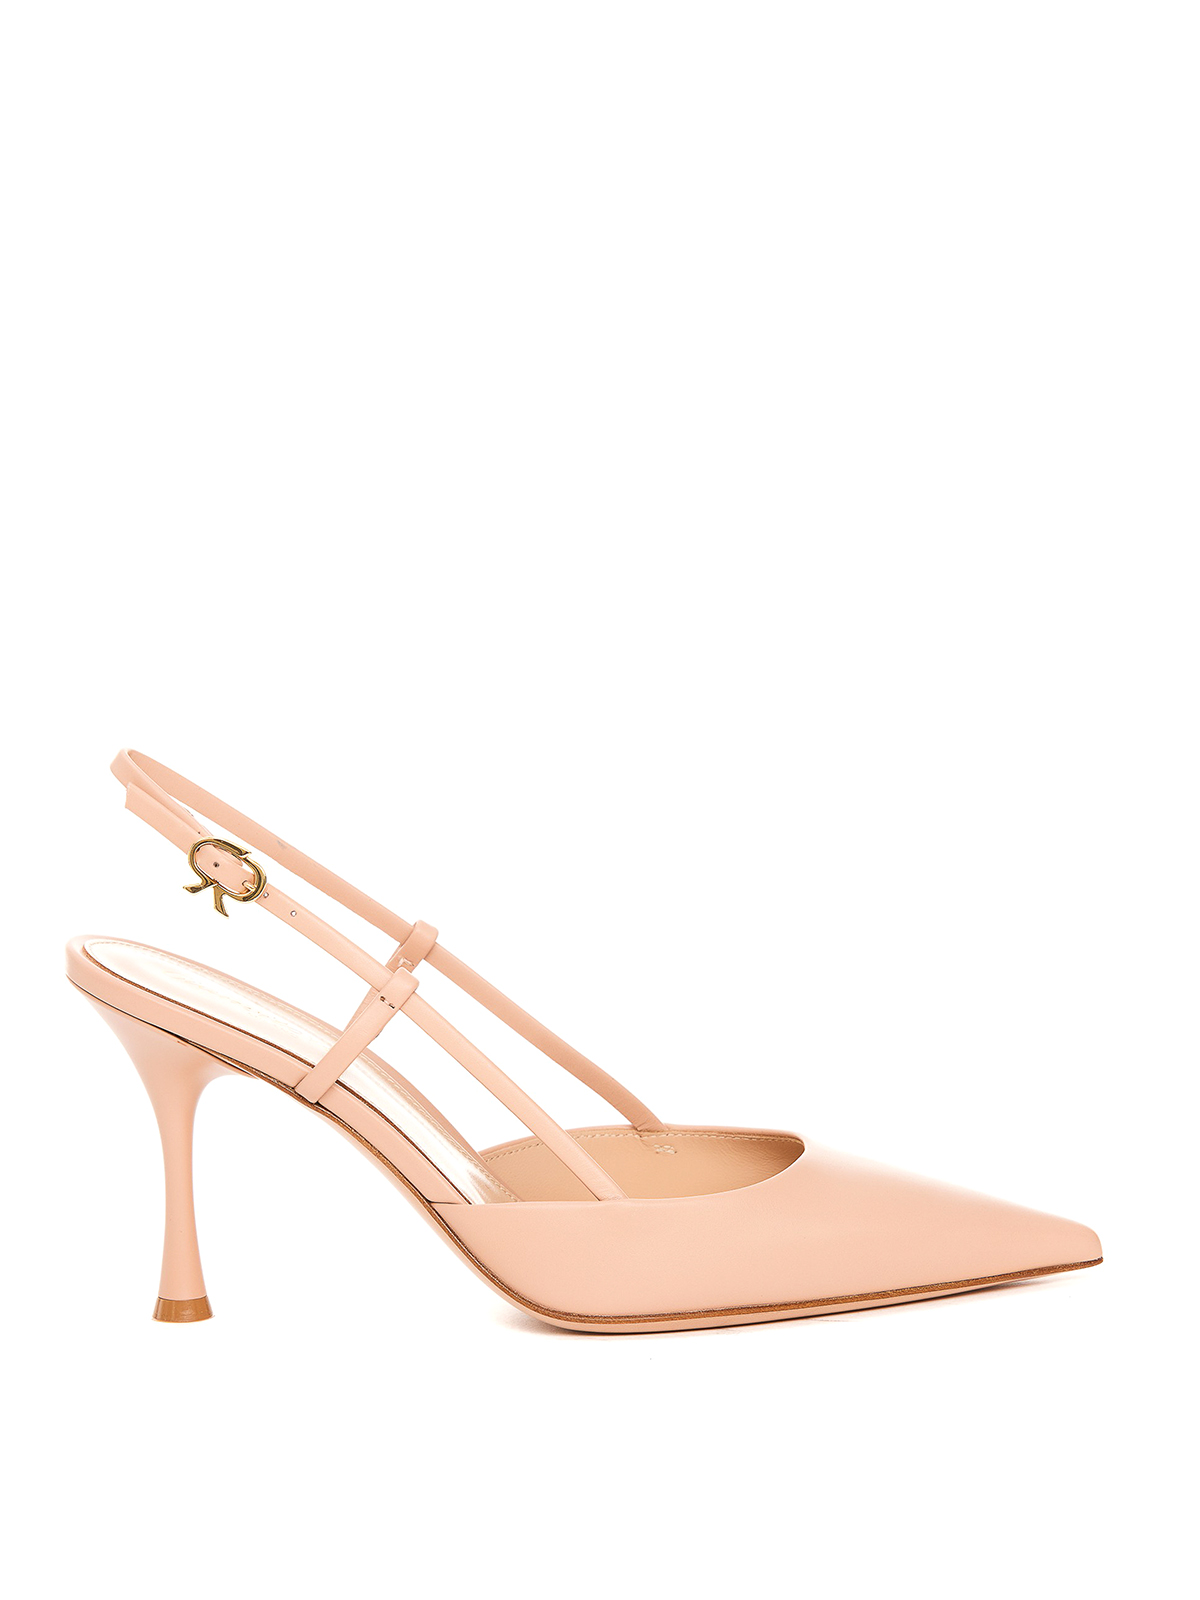 Gianvito Rossi Leather Slingbacks In Pink